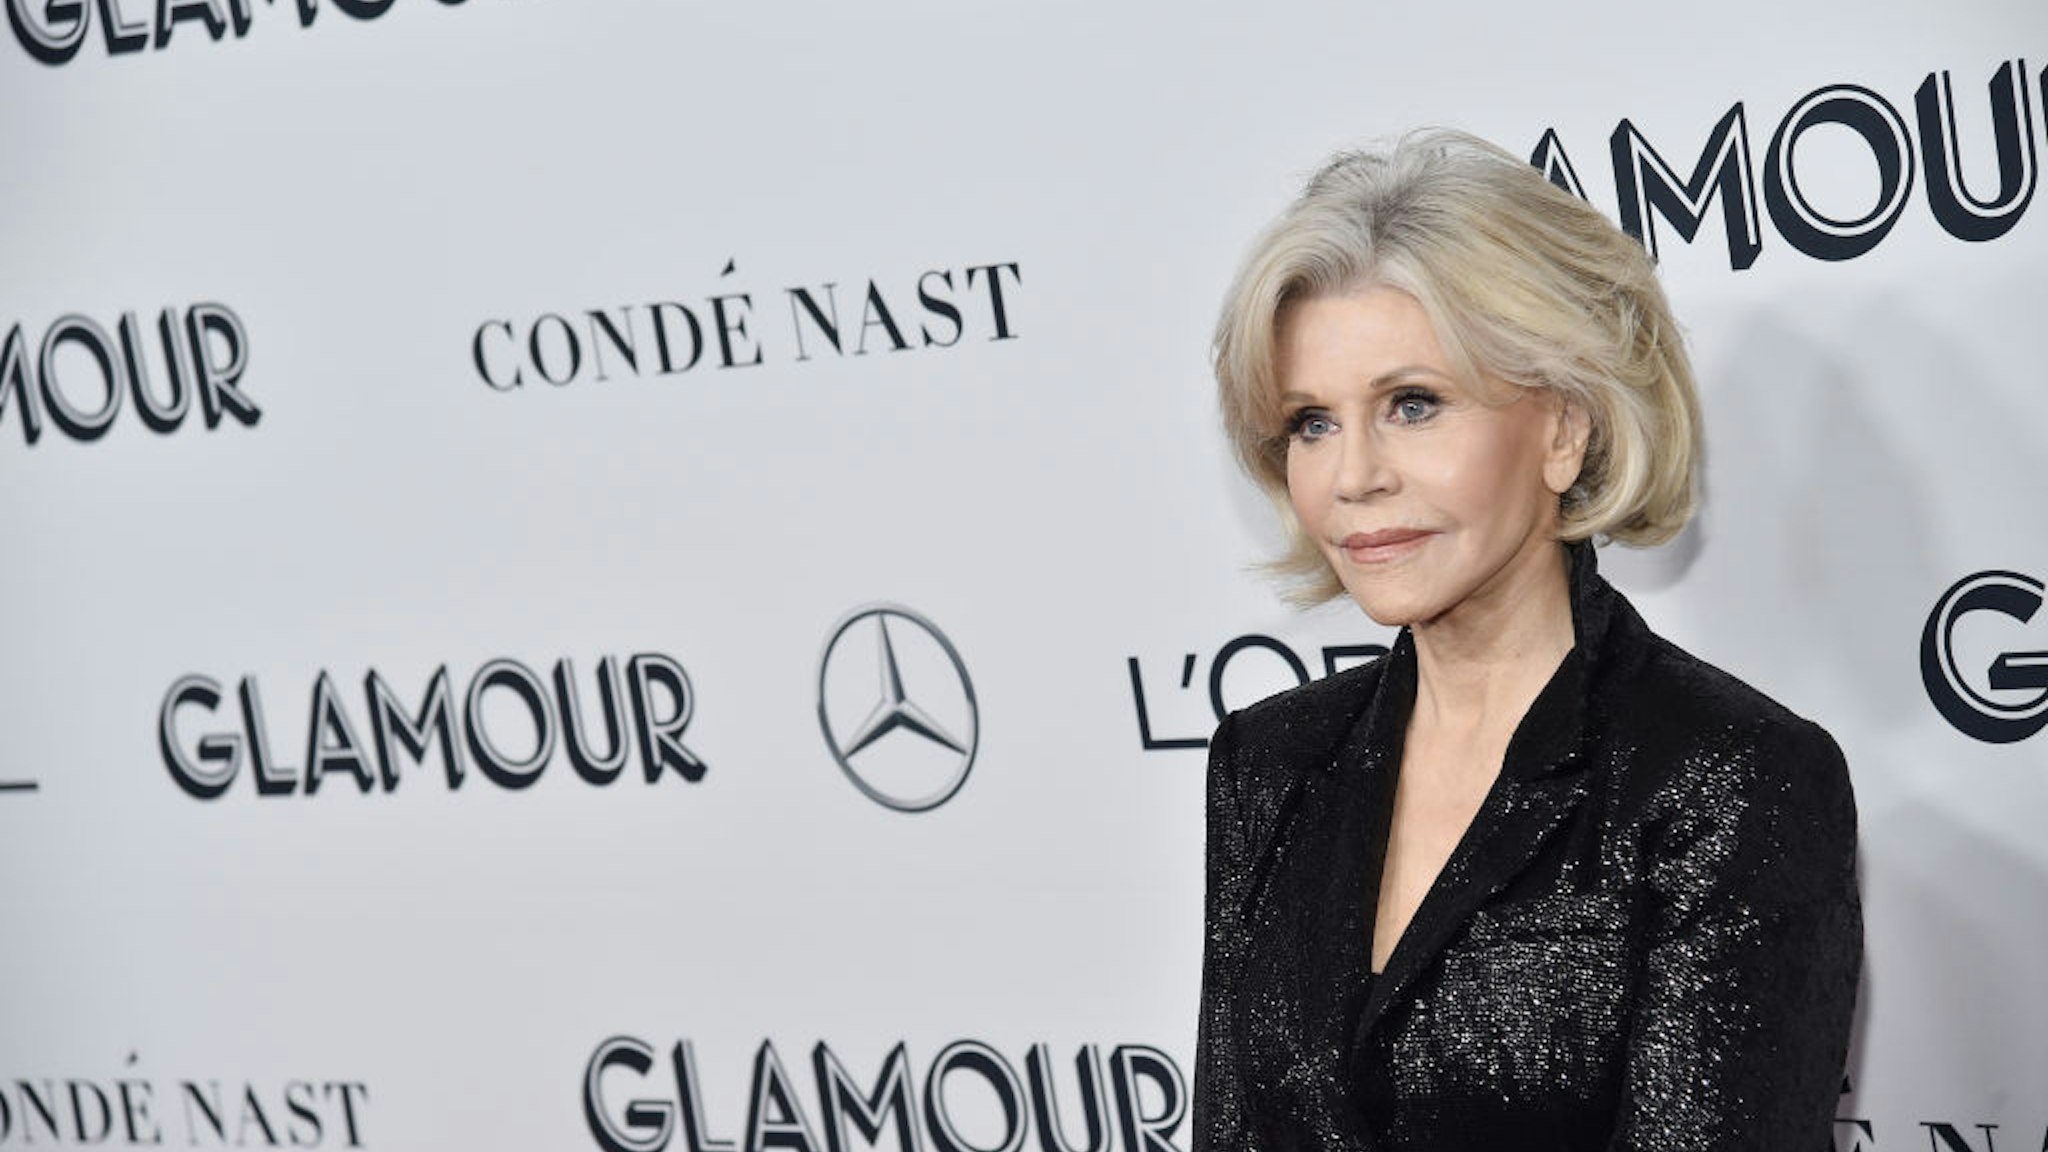 Jane Fonda attends the 2019 Glamour Women Of The Year Awards at Alice Tully Hall on November 11, 2019 in New York City.